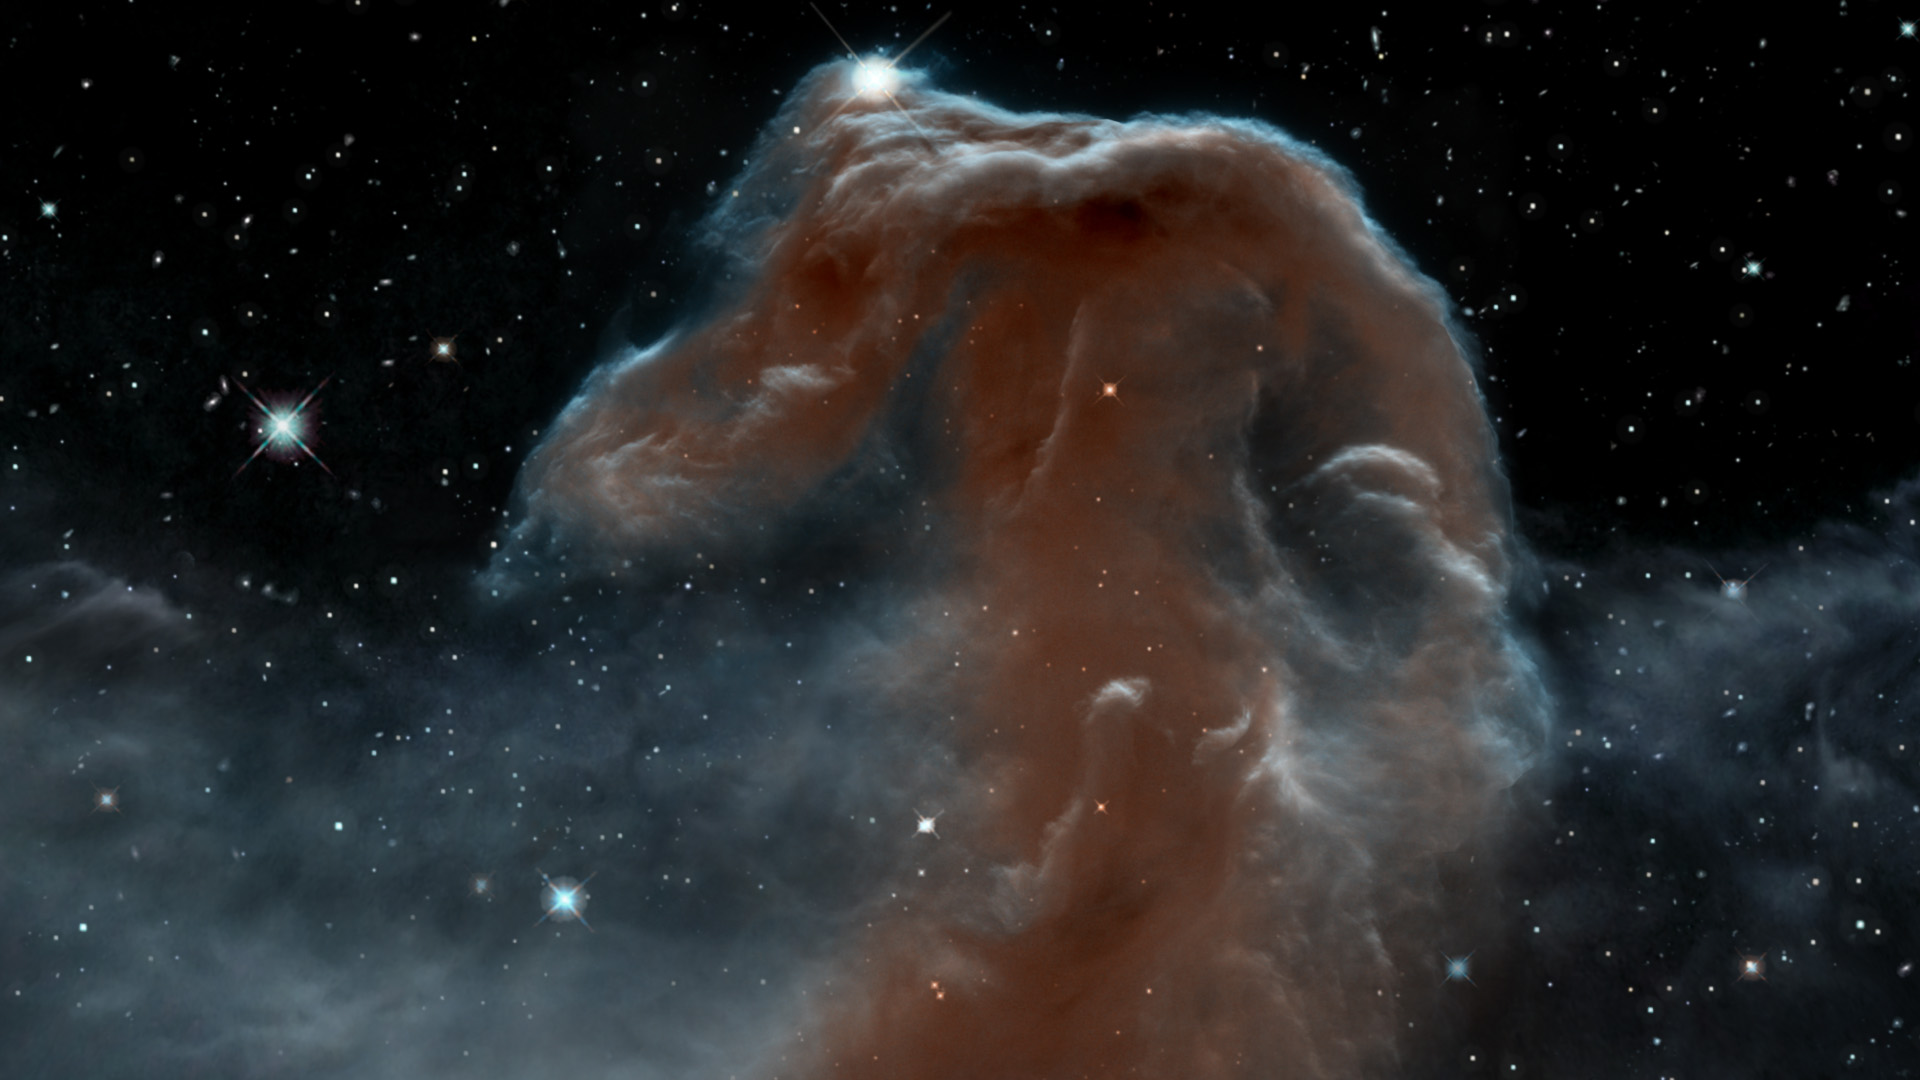 A visualization of the gaseous landscape of the Horsehead Nebula as seen in infrared light